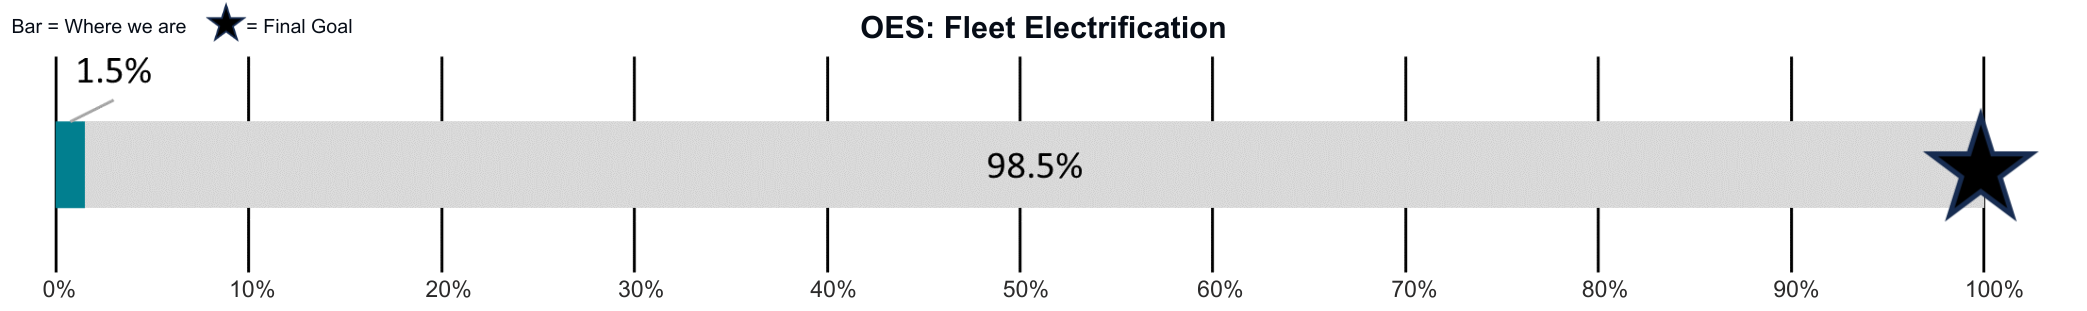 OES_ transitioning the county’s fleet to fully electric or non-carbon vehicles by 2035 with progress showing 1.5%